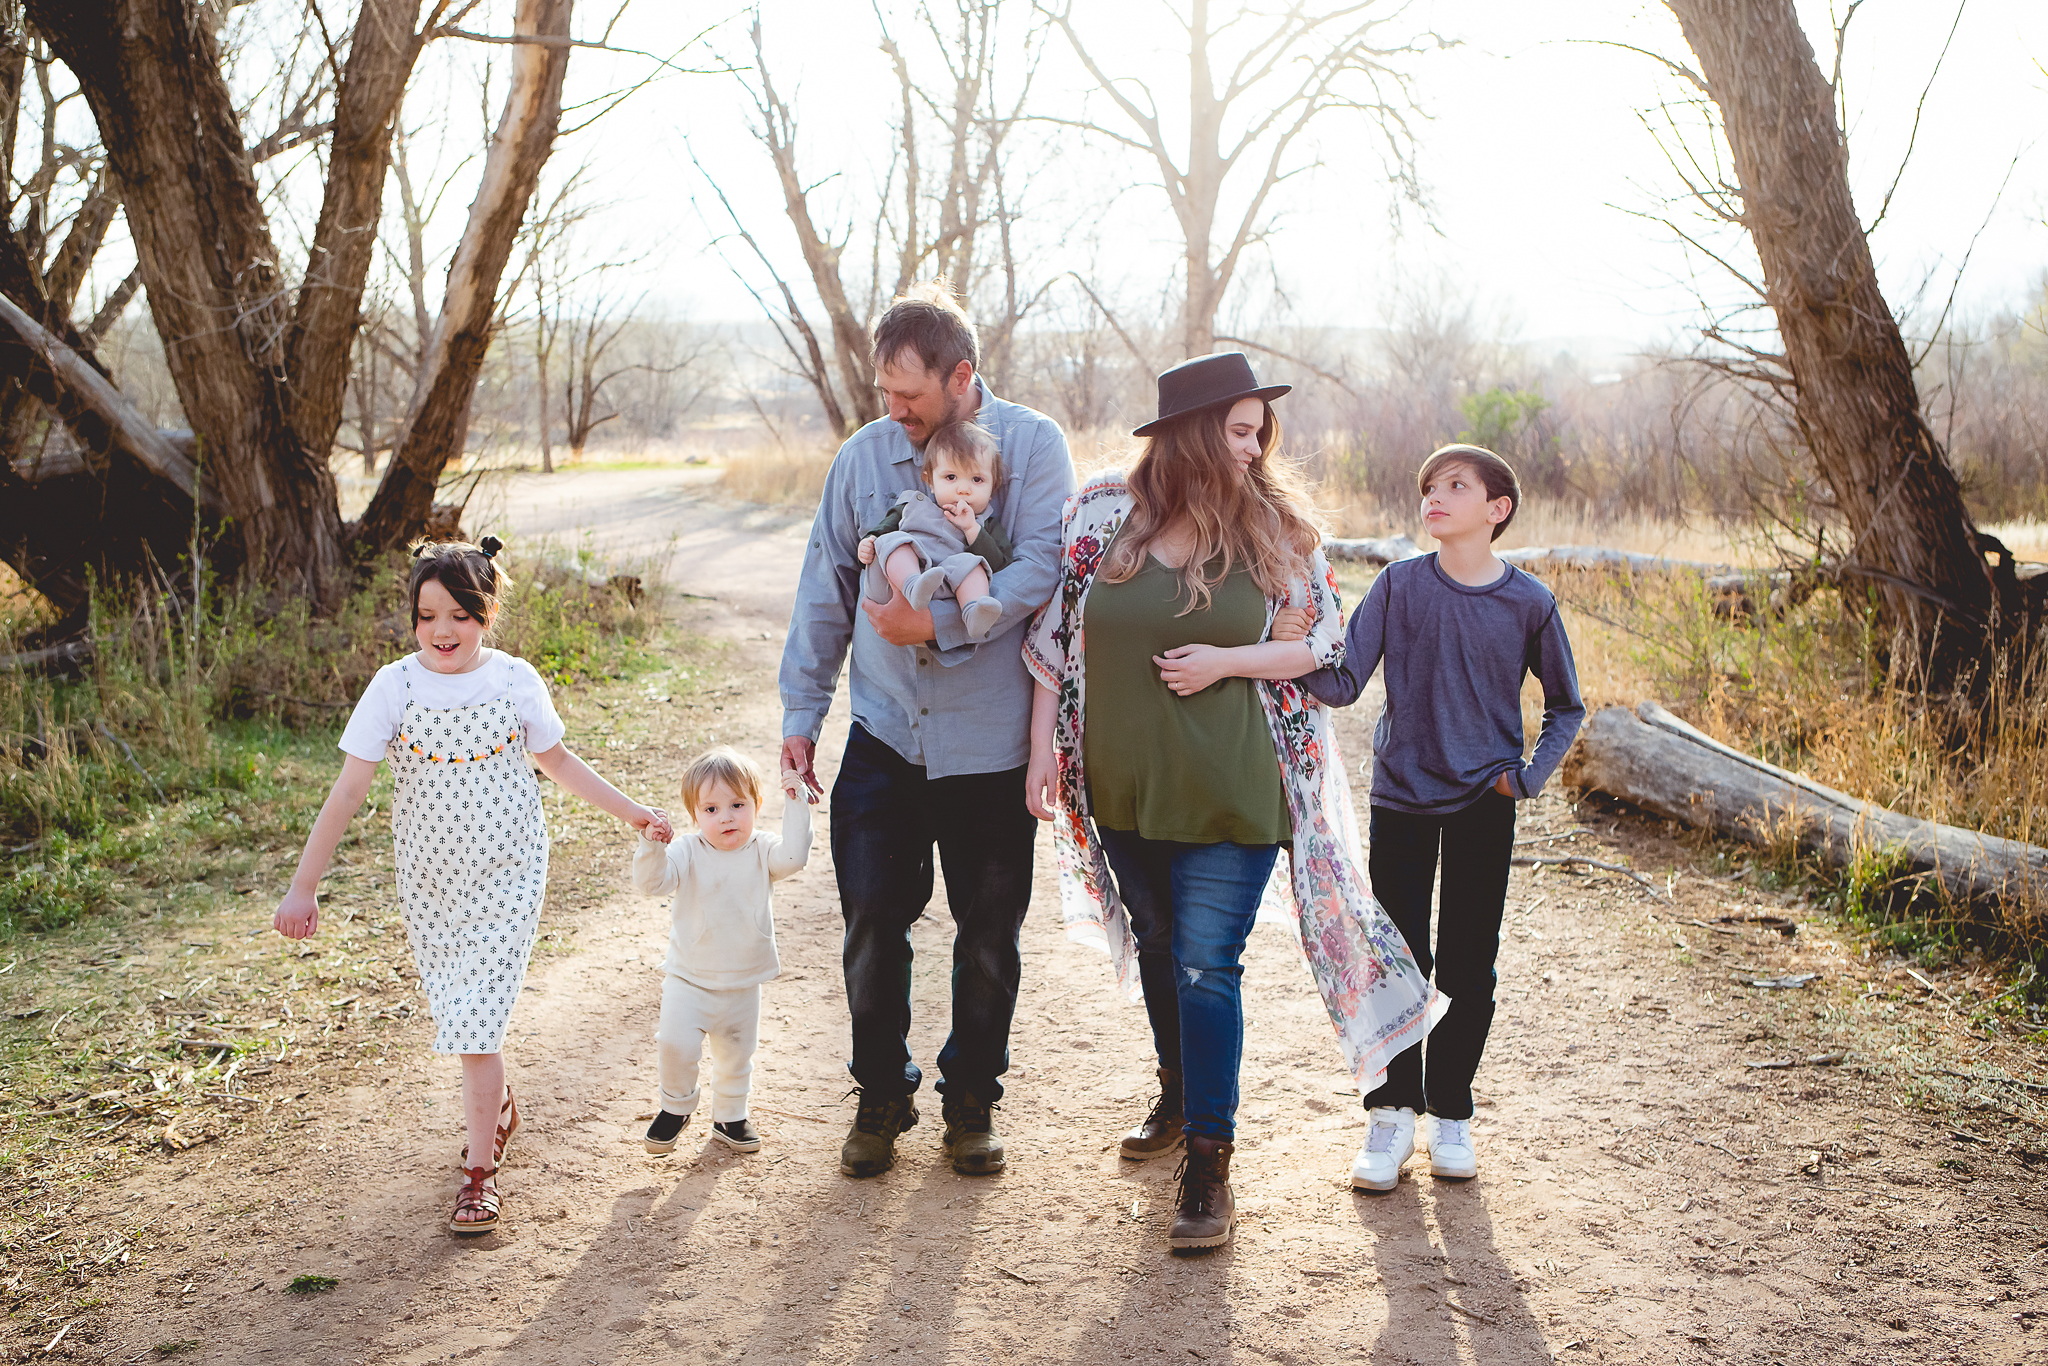 Colorado Springs Family Photography | The M Family 2022